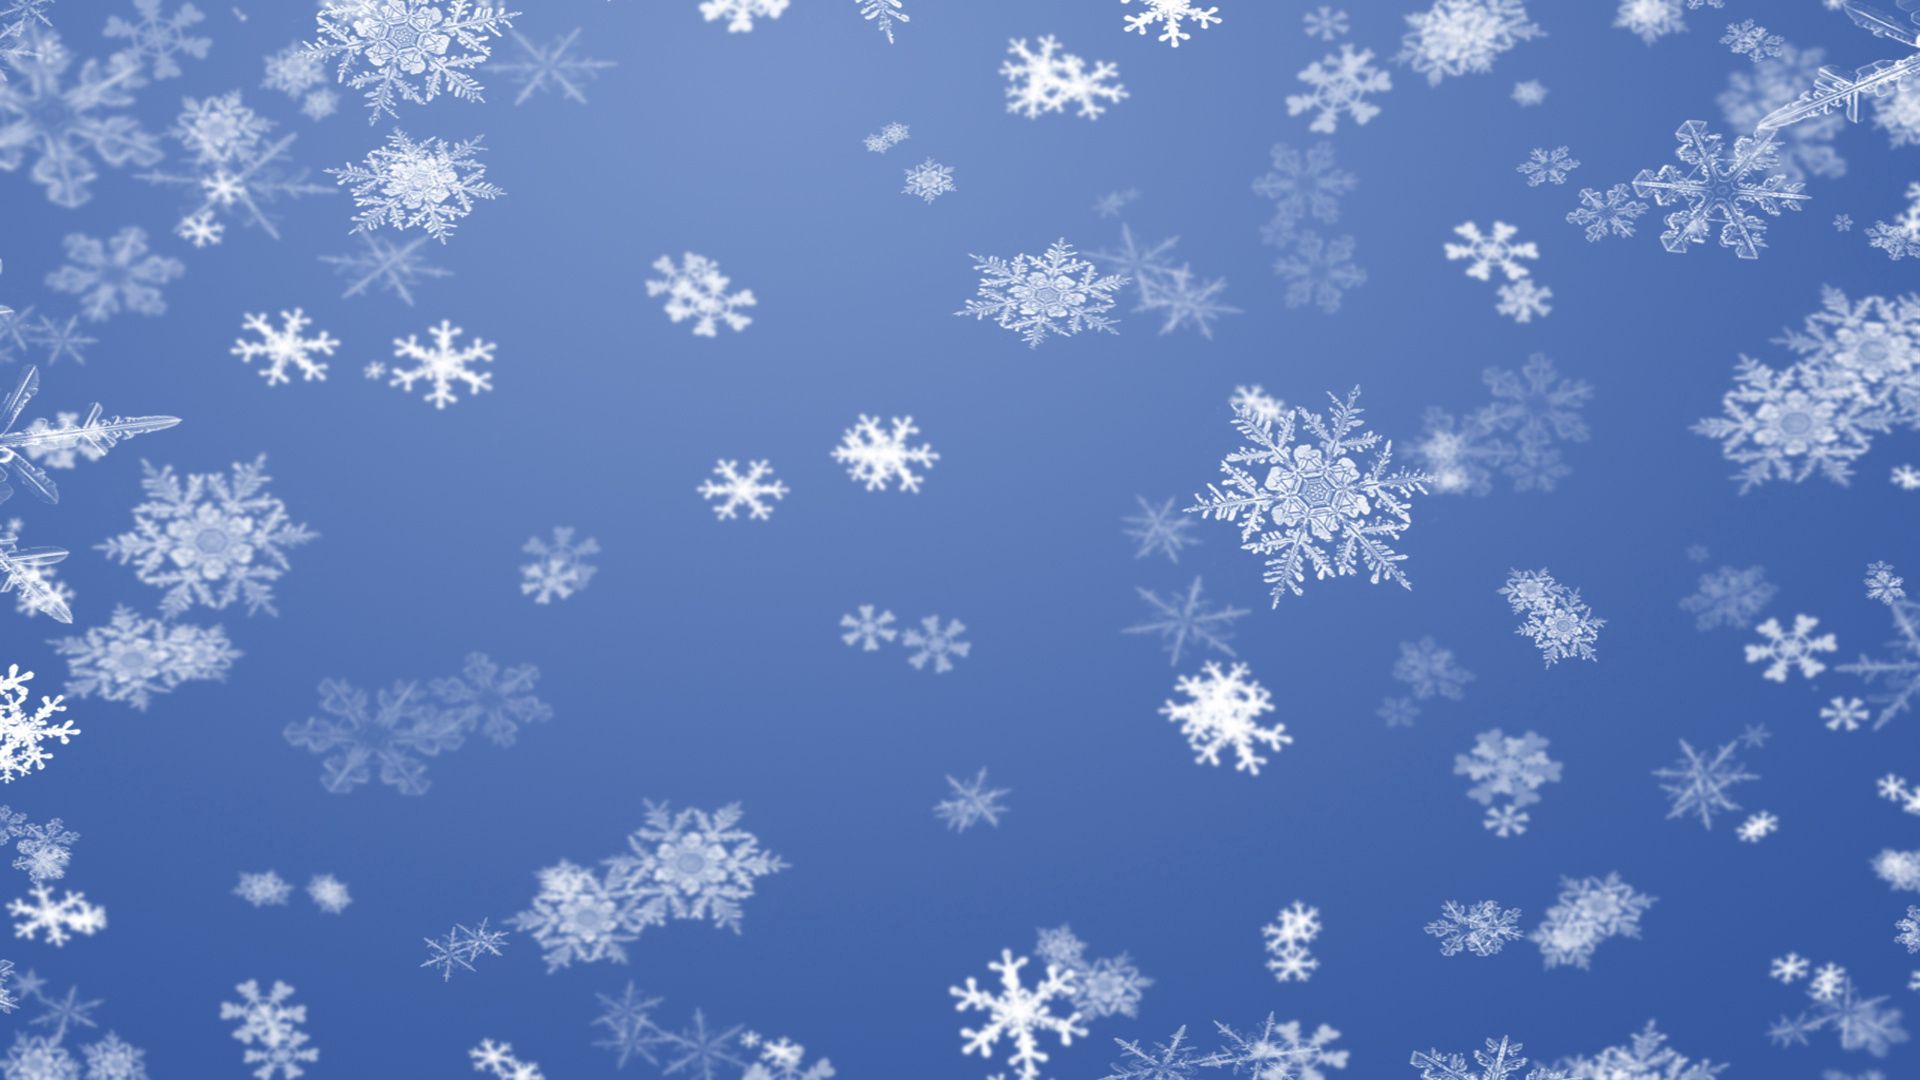 Free HD patterns, snowflakes, winter, background, texture, textures